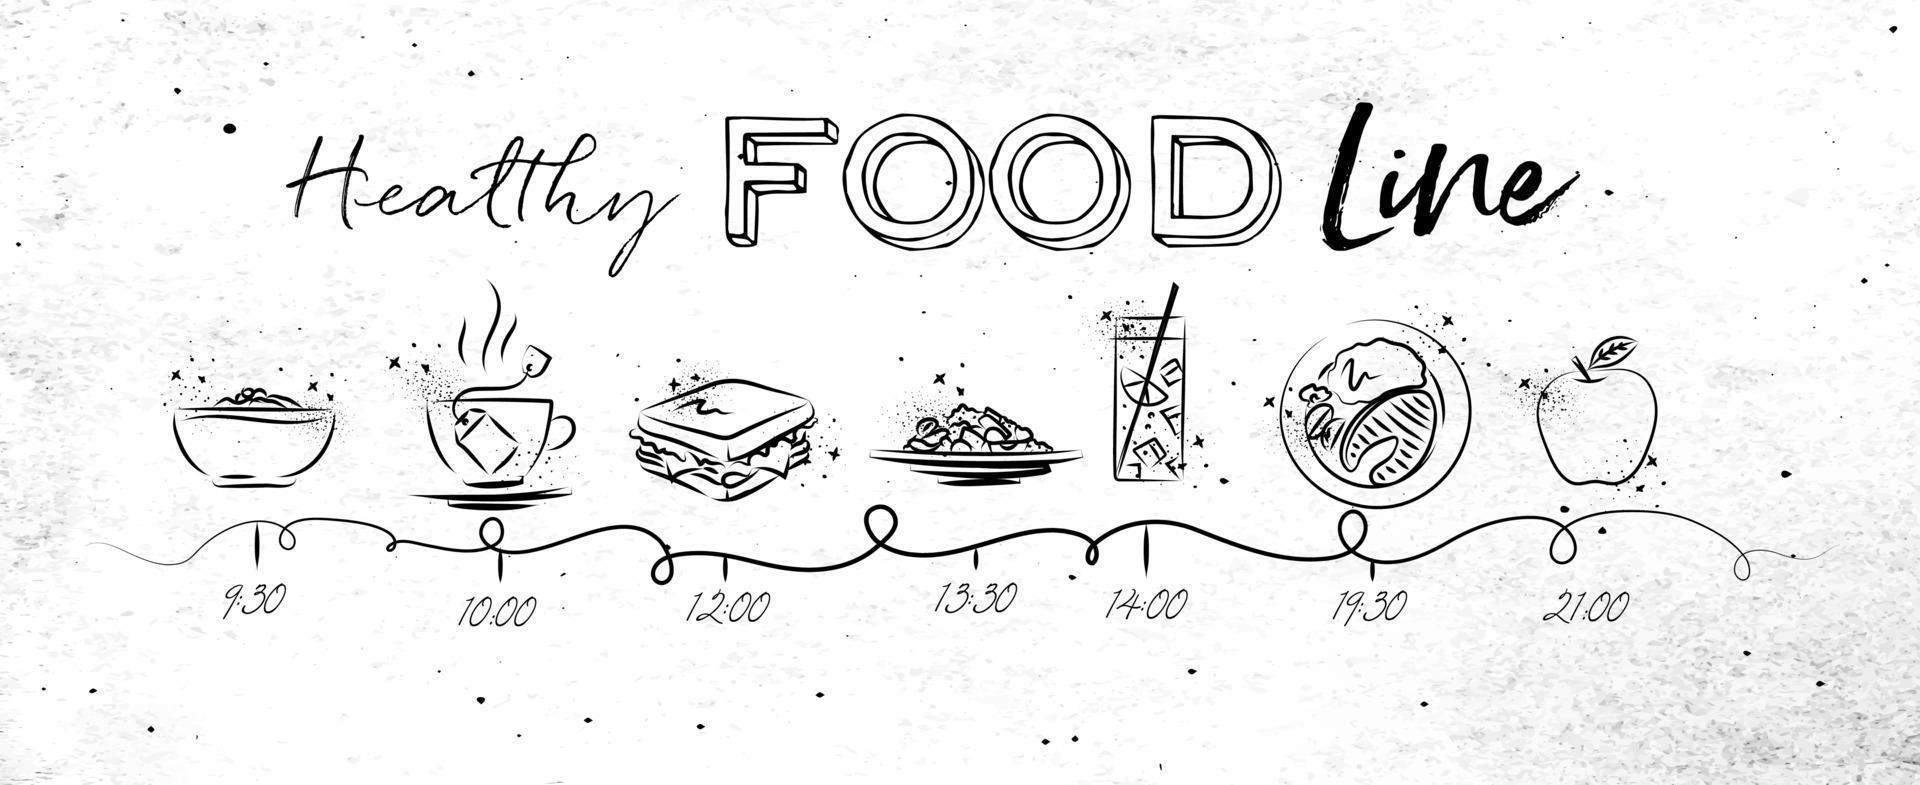 Timeline on healthy food theme illustrated time of meal and food icons drawing with black lines on dirty paper background vector